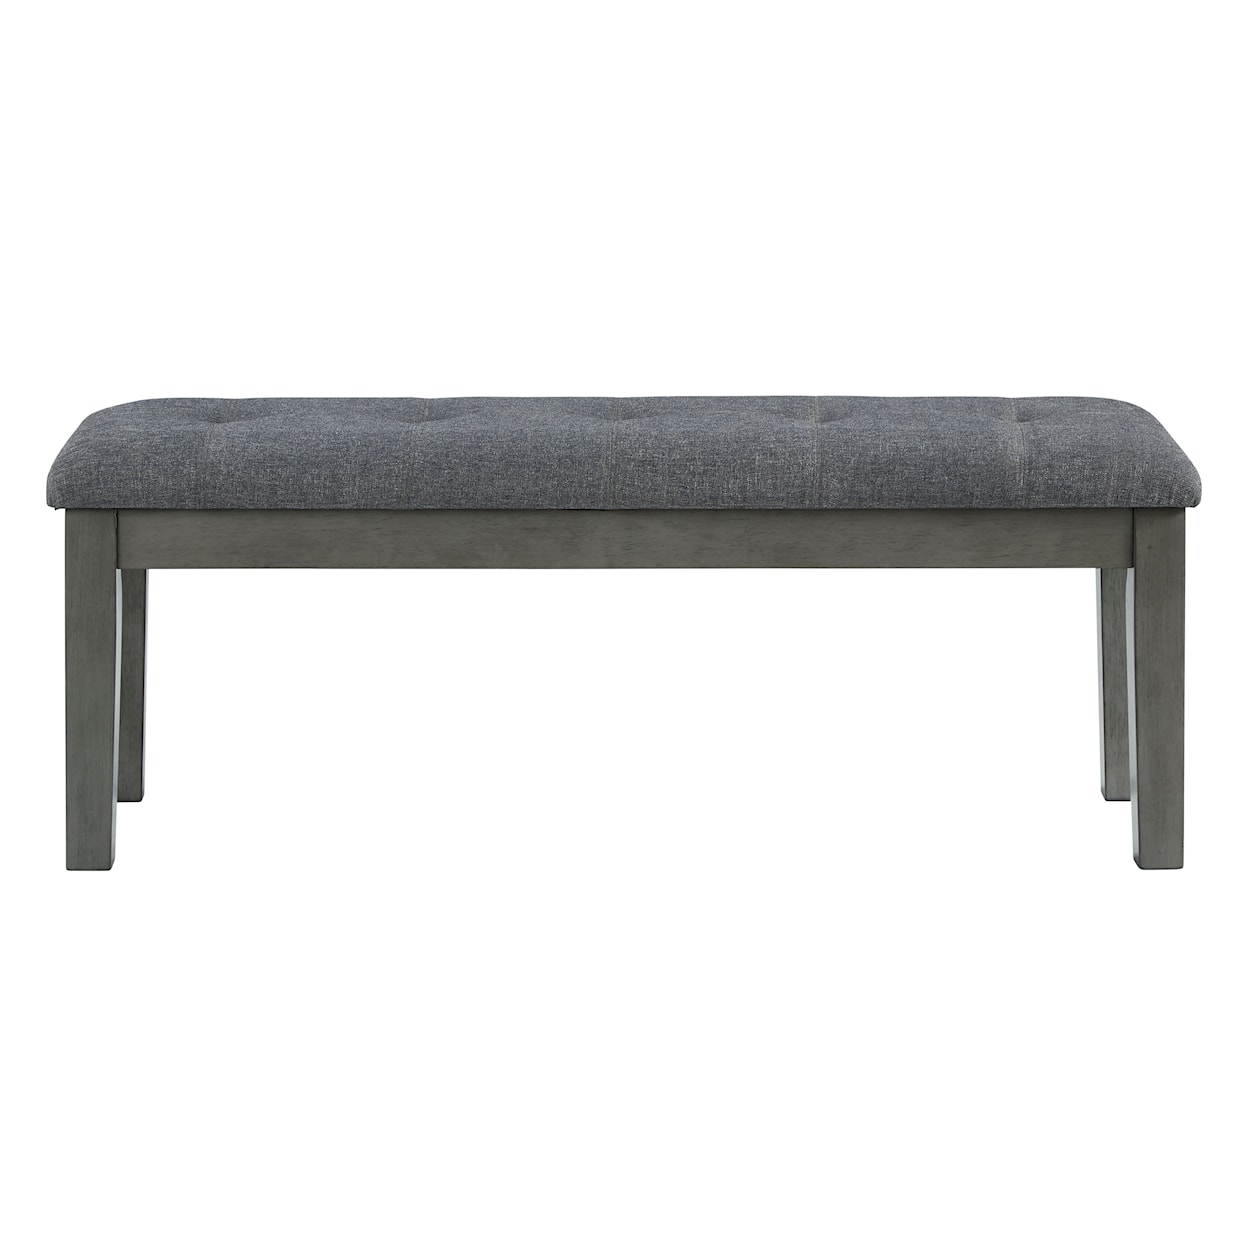 Signature Design by Ashley Hallanden Dining Benches